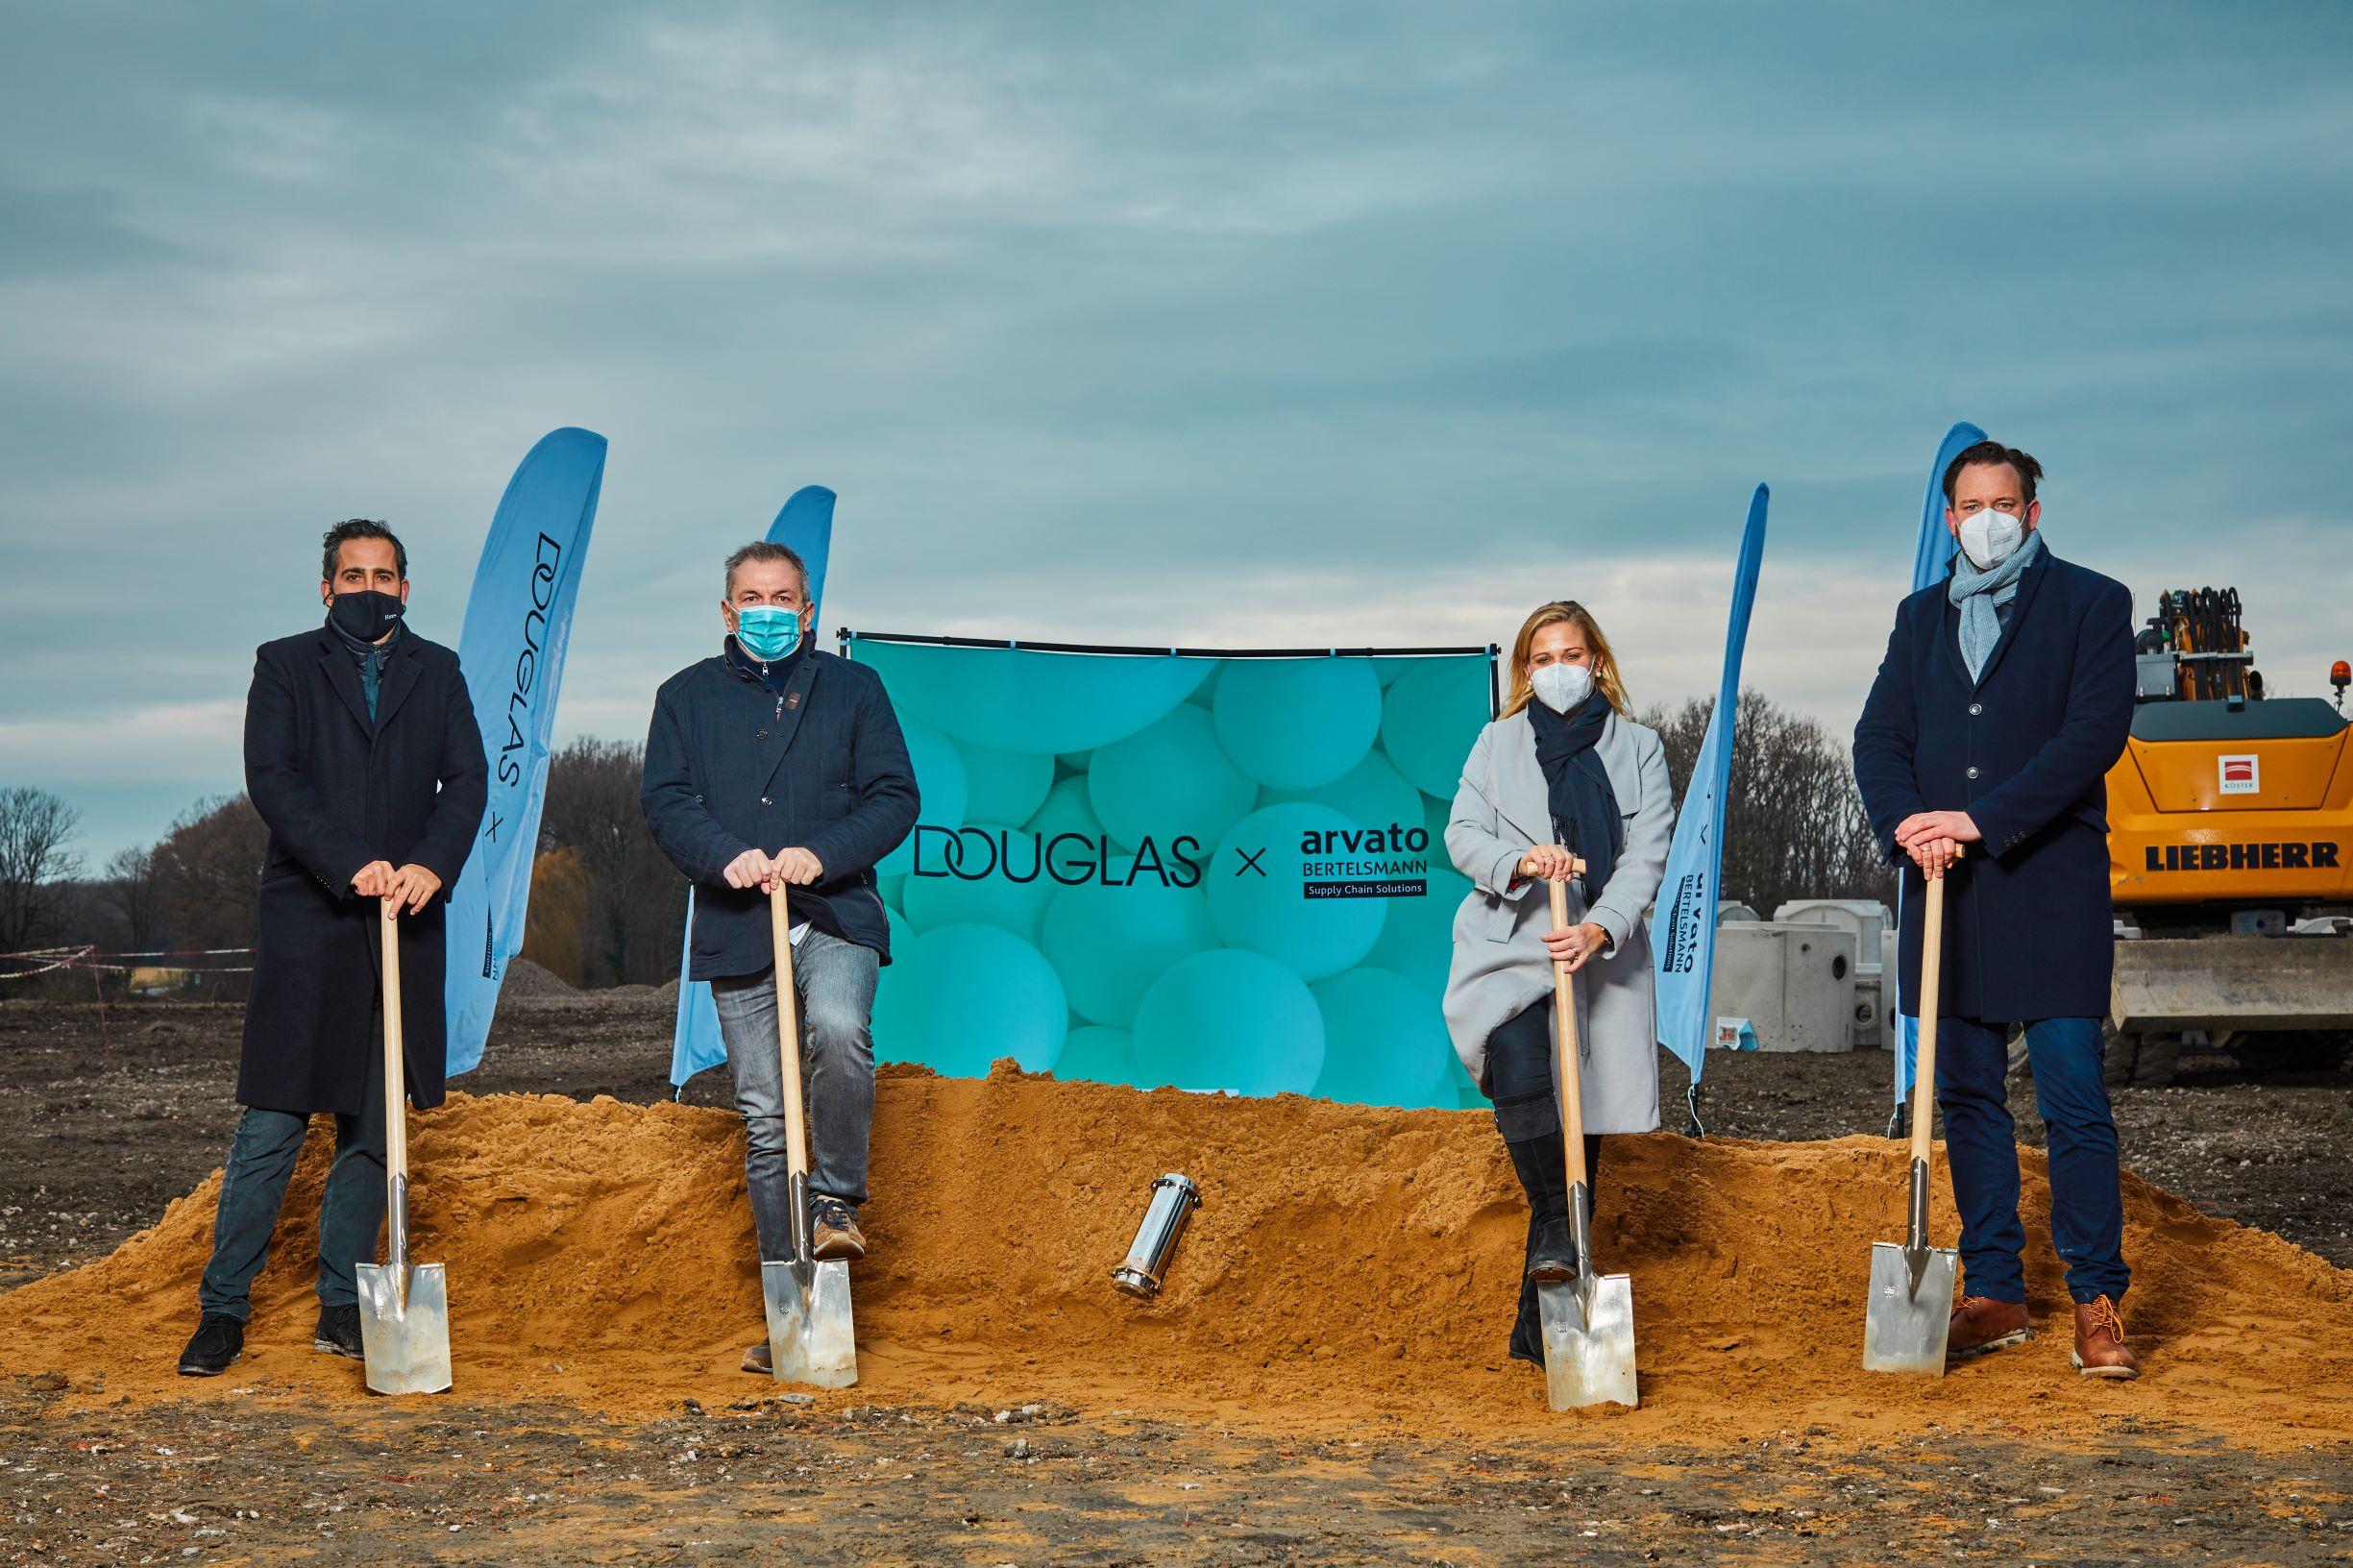 Picture: from left to right Alexander Moell (Senior Managing Director, Hines Immobilien), Frank Schirrmeister (CEO, Arvato Supply Chain Solutions), Julia Börs (President Consumer Products, Arvato Supply Chain Solutions), Christian Meister (Managing Director, Hines Immobilien)